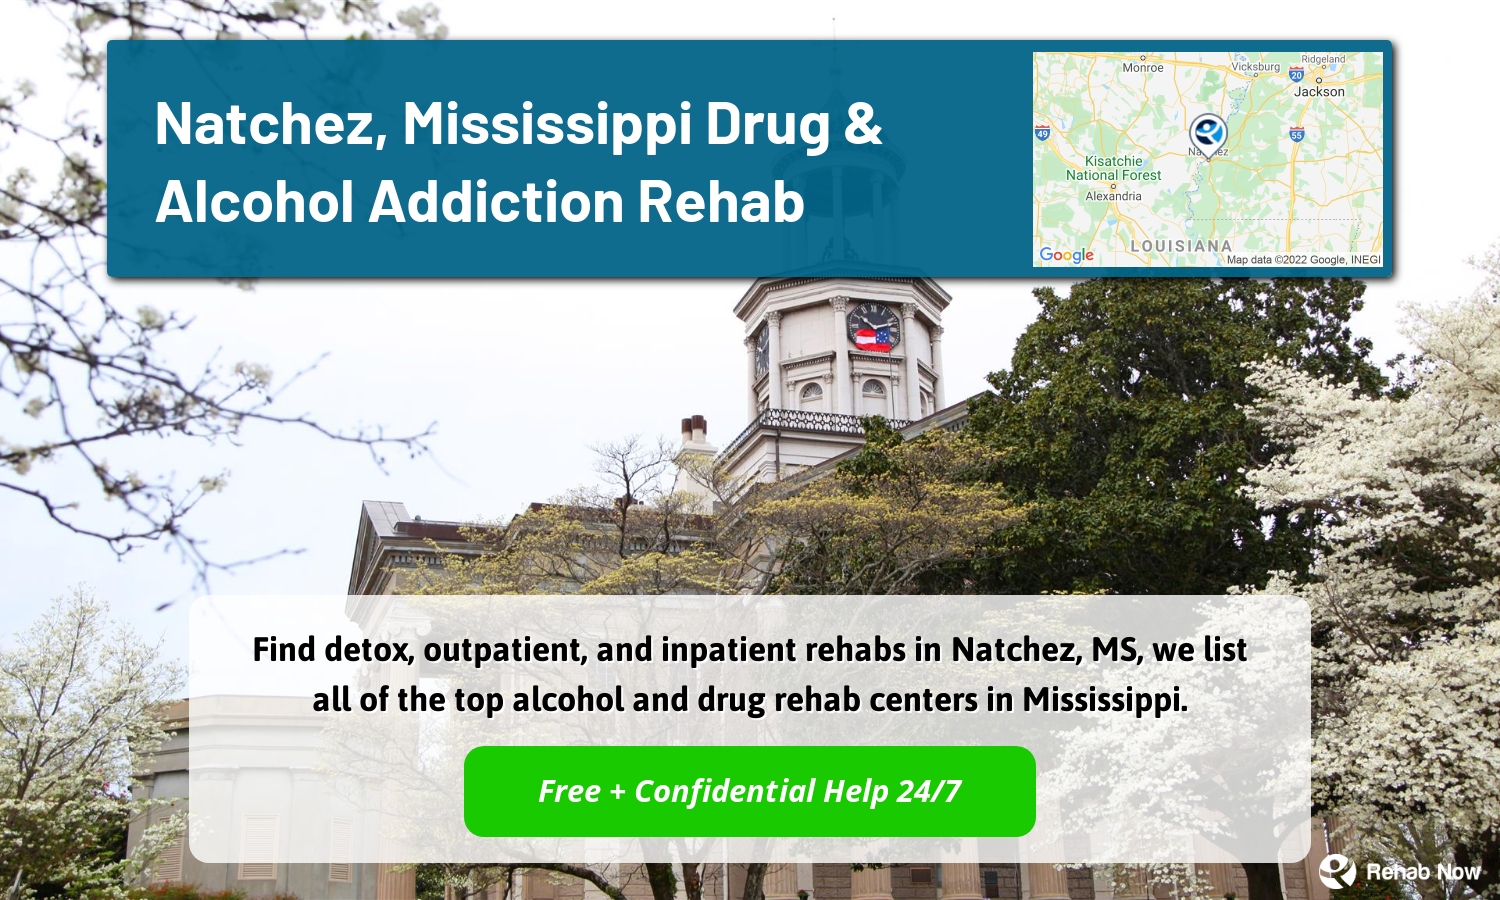 Find detox, outpatient, and inpatient rehabs in Natchez, MS, we list all of the top alcohol and drug rehab centers in Mississippi.